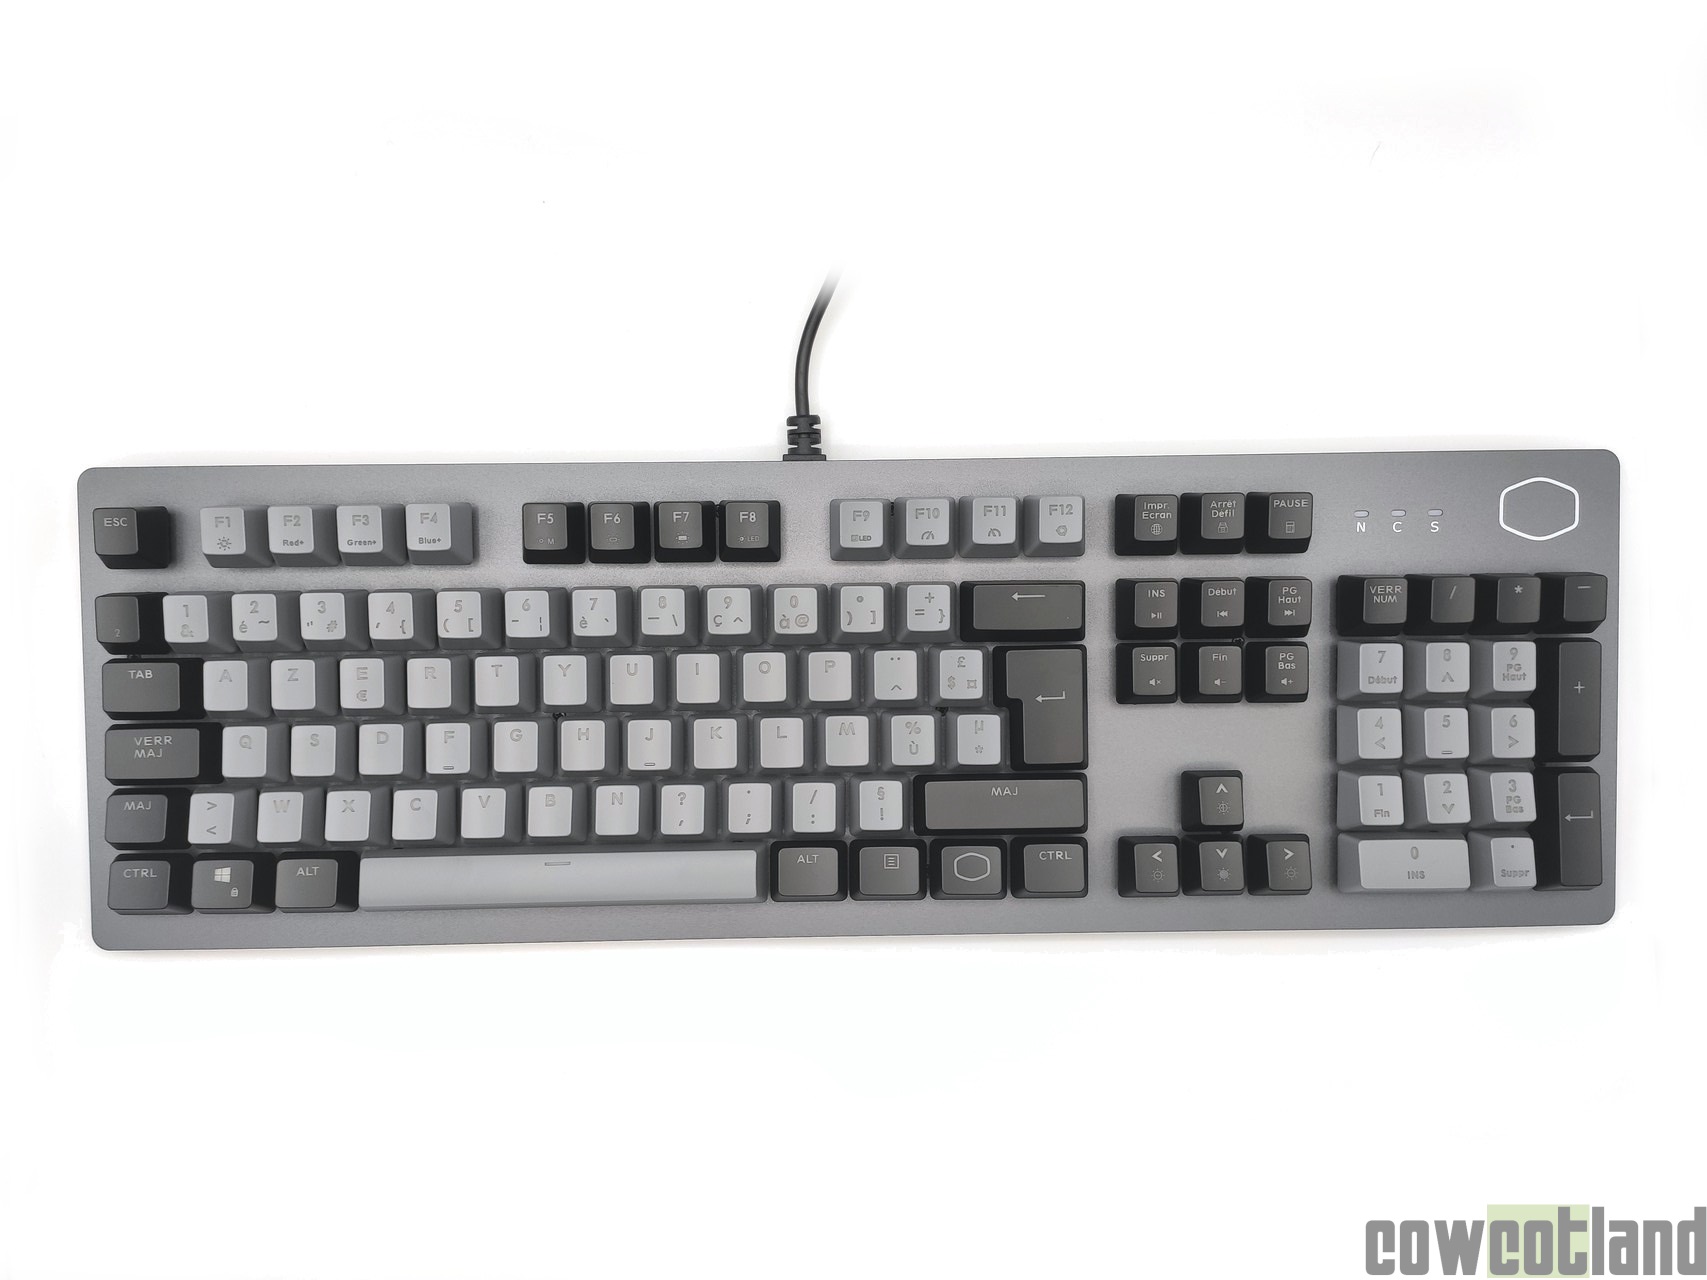 Image 46786, galerie Test clavier Cooler Master CK352 : un clavier plug-and-play  switchs optiques